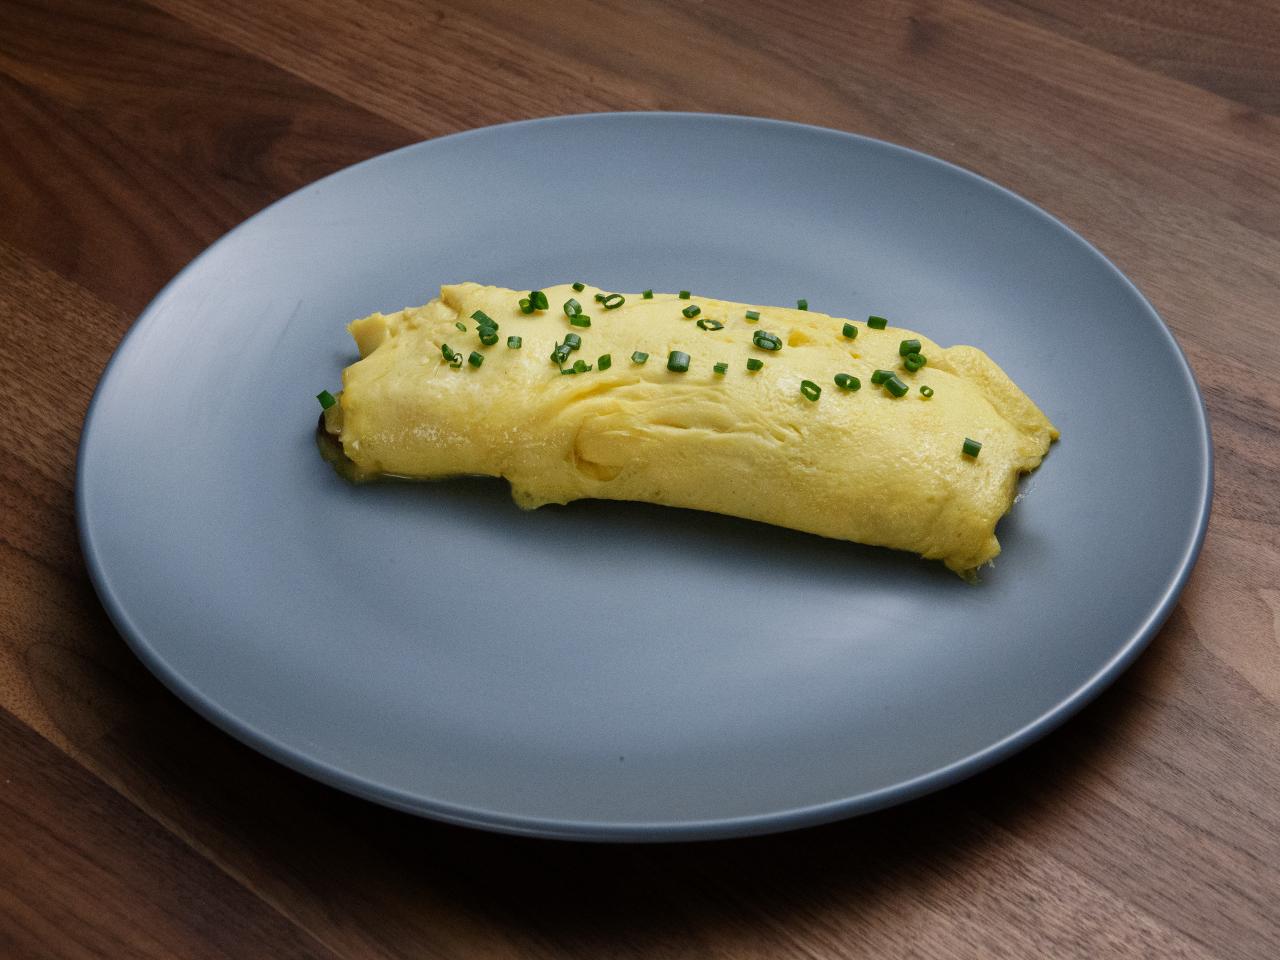 https://food.fnr.sndimg.com/content/dam/images/food/fullset/2019/8/15/0/WO1704_Anne-Burrells-French-Omelette-with-Mushrooms-Ham-and-Gruyere_s4x3.jpg.rend.hgtvcom.1280.960.suffix/1565875712824.jpeg